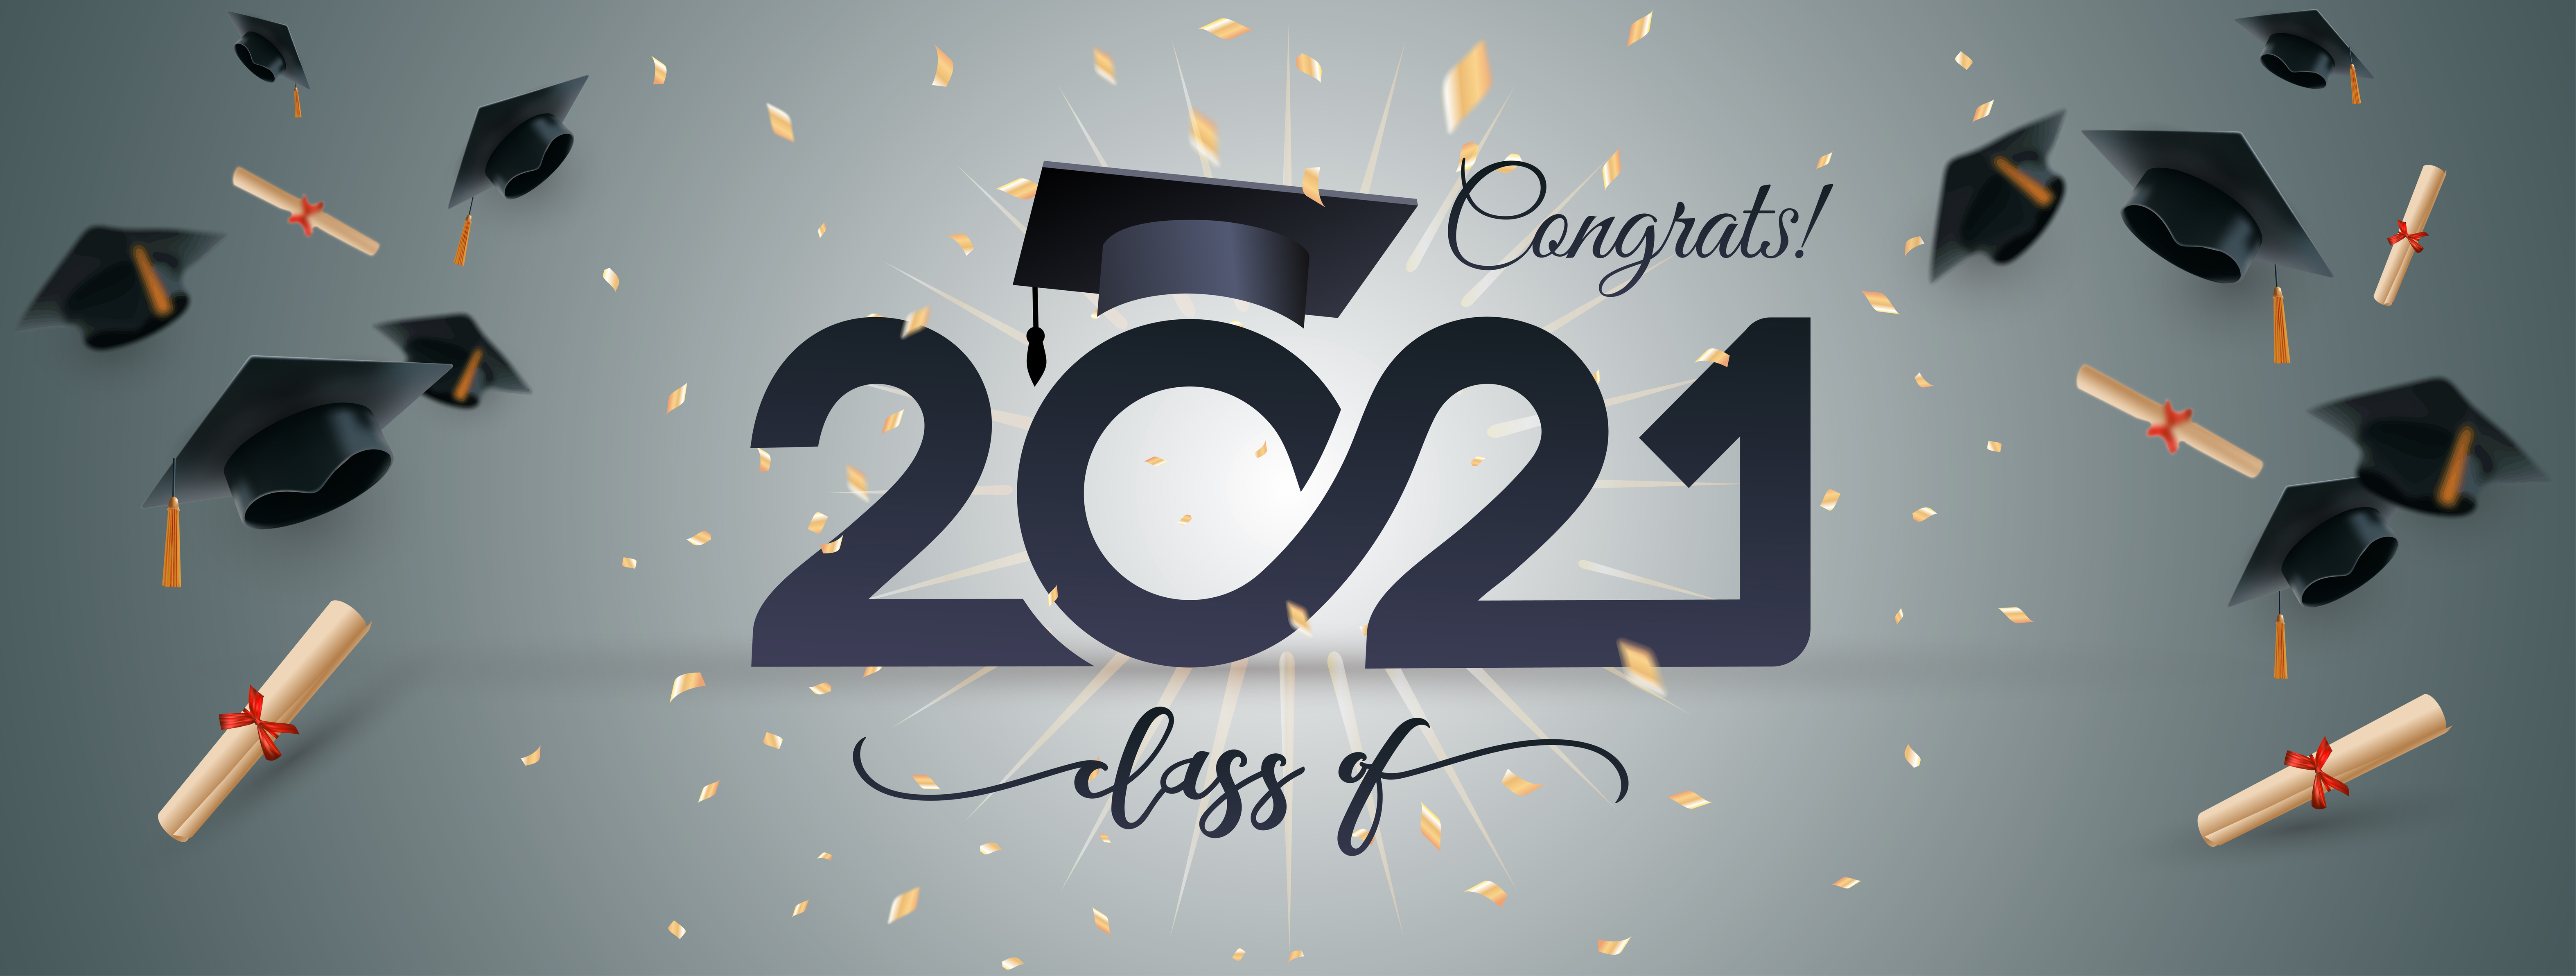 Congratuations Class of 2021 from the Graduate School